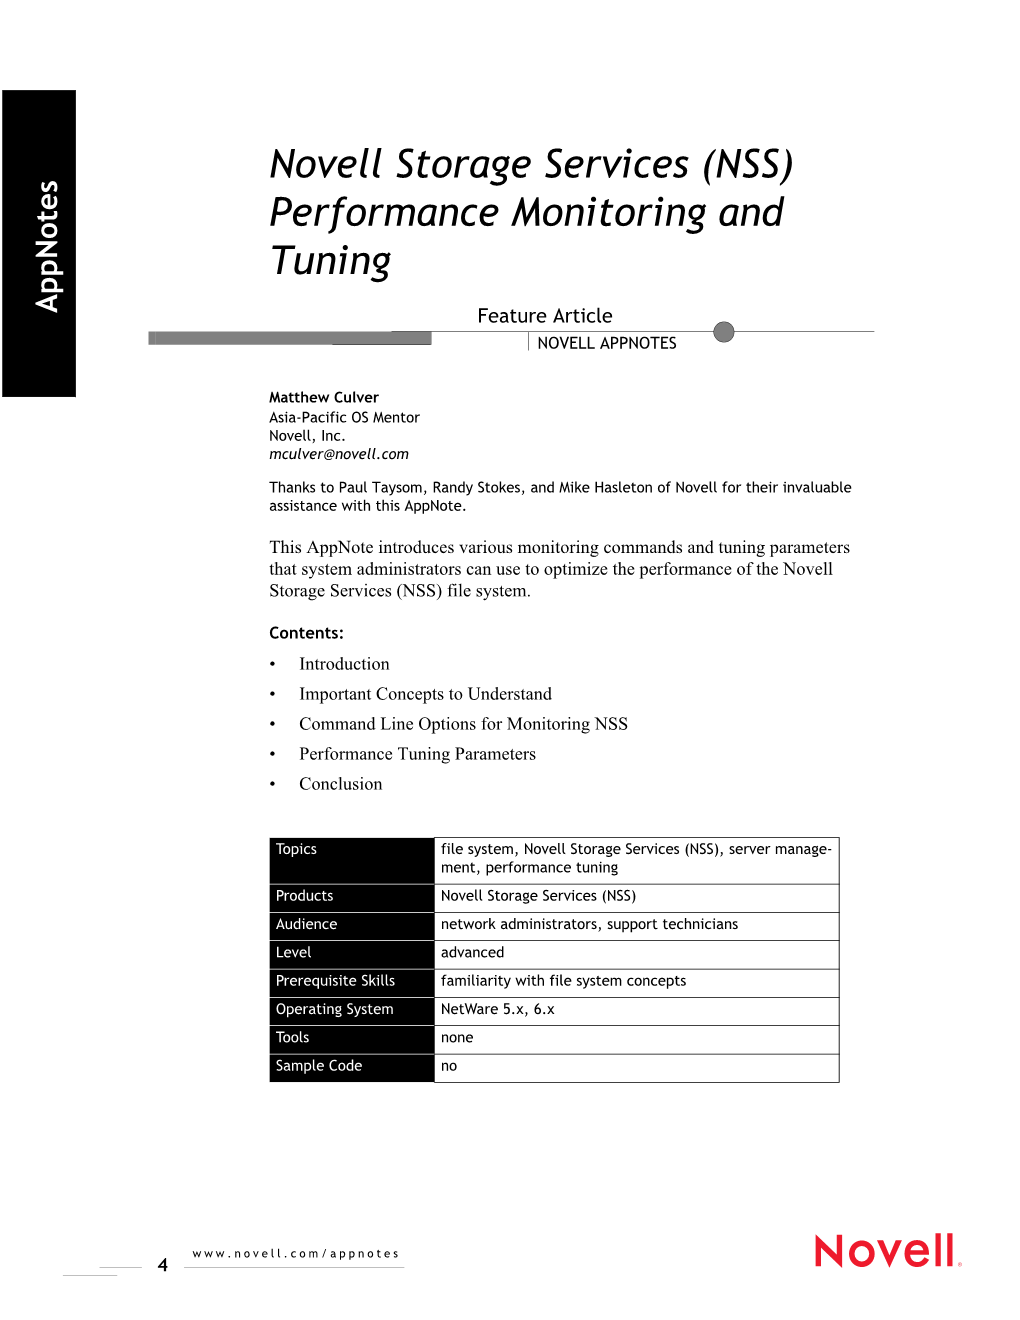 Novell Storage Services (NSS) Performance Monitoring and Tuning